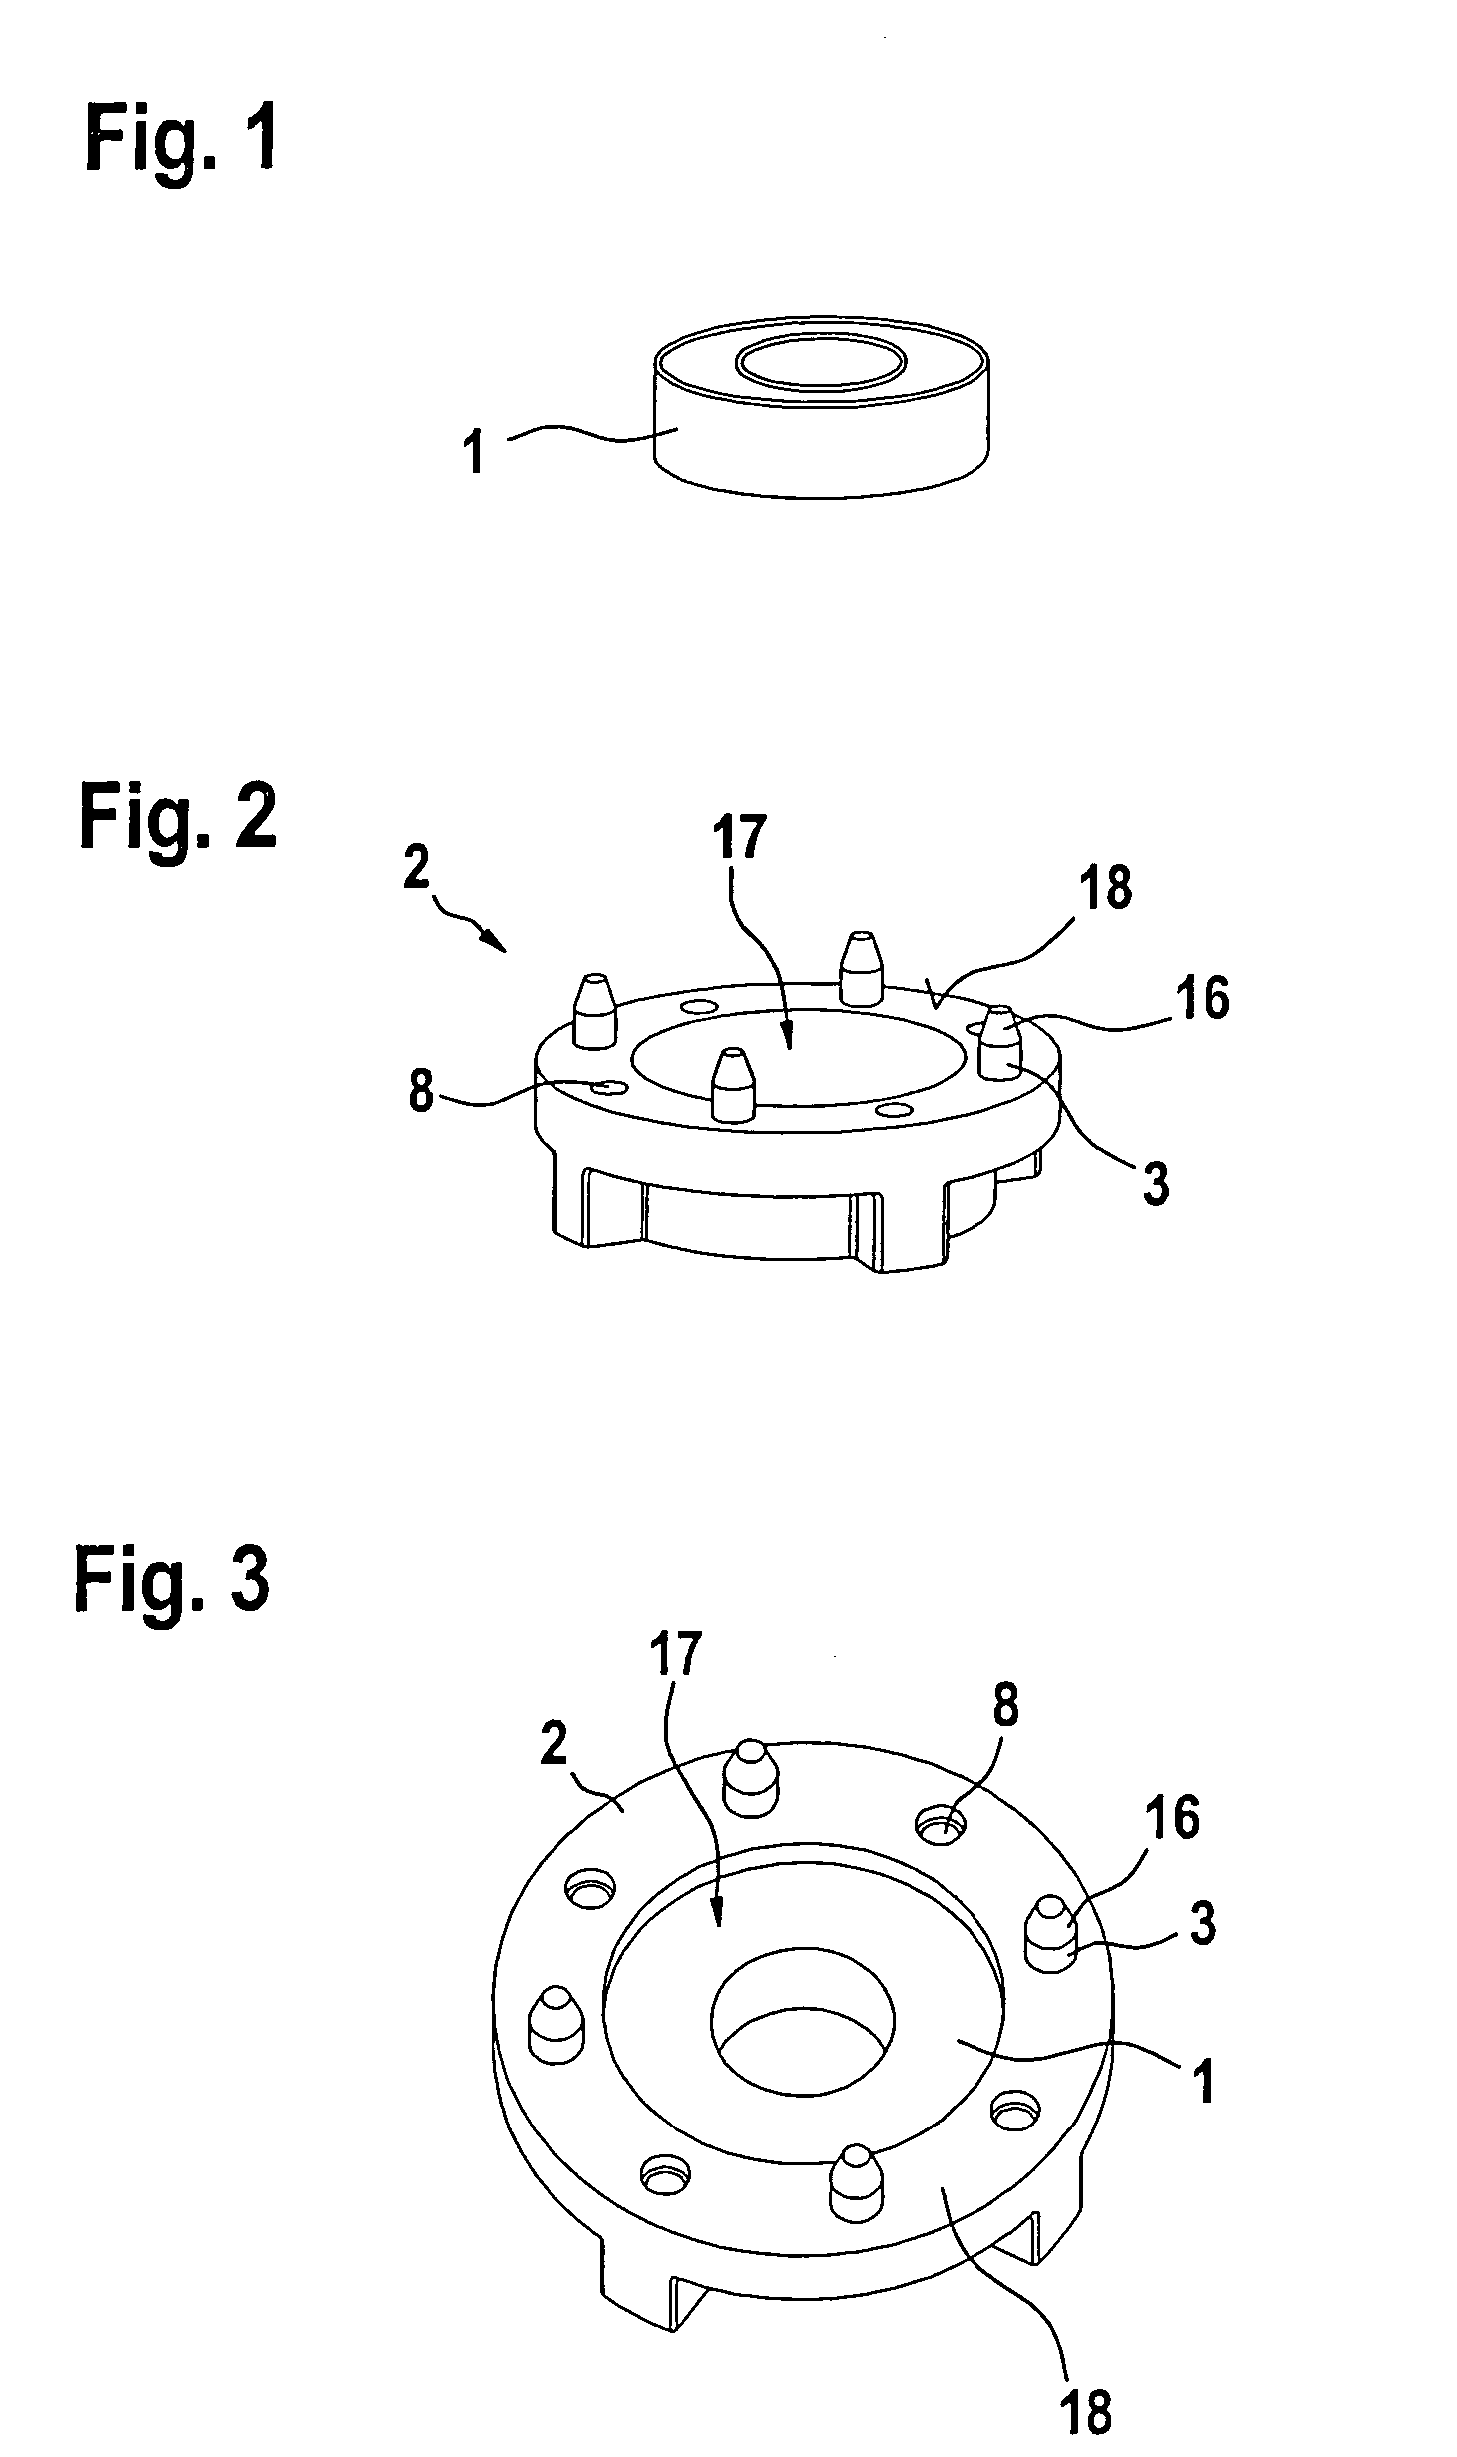 Grinding-disk receiving element especially for a hand-guided electric grinding tool